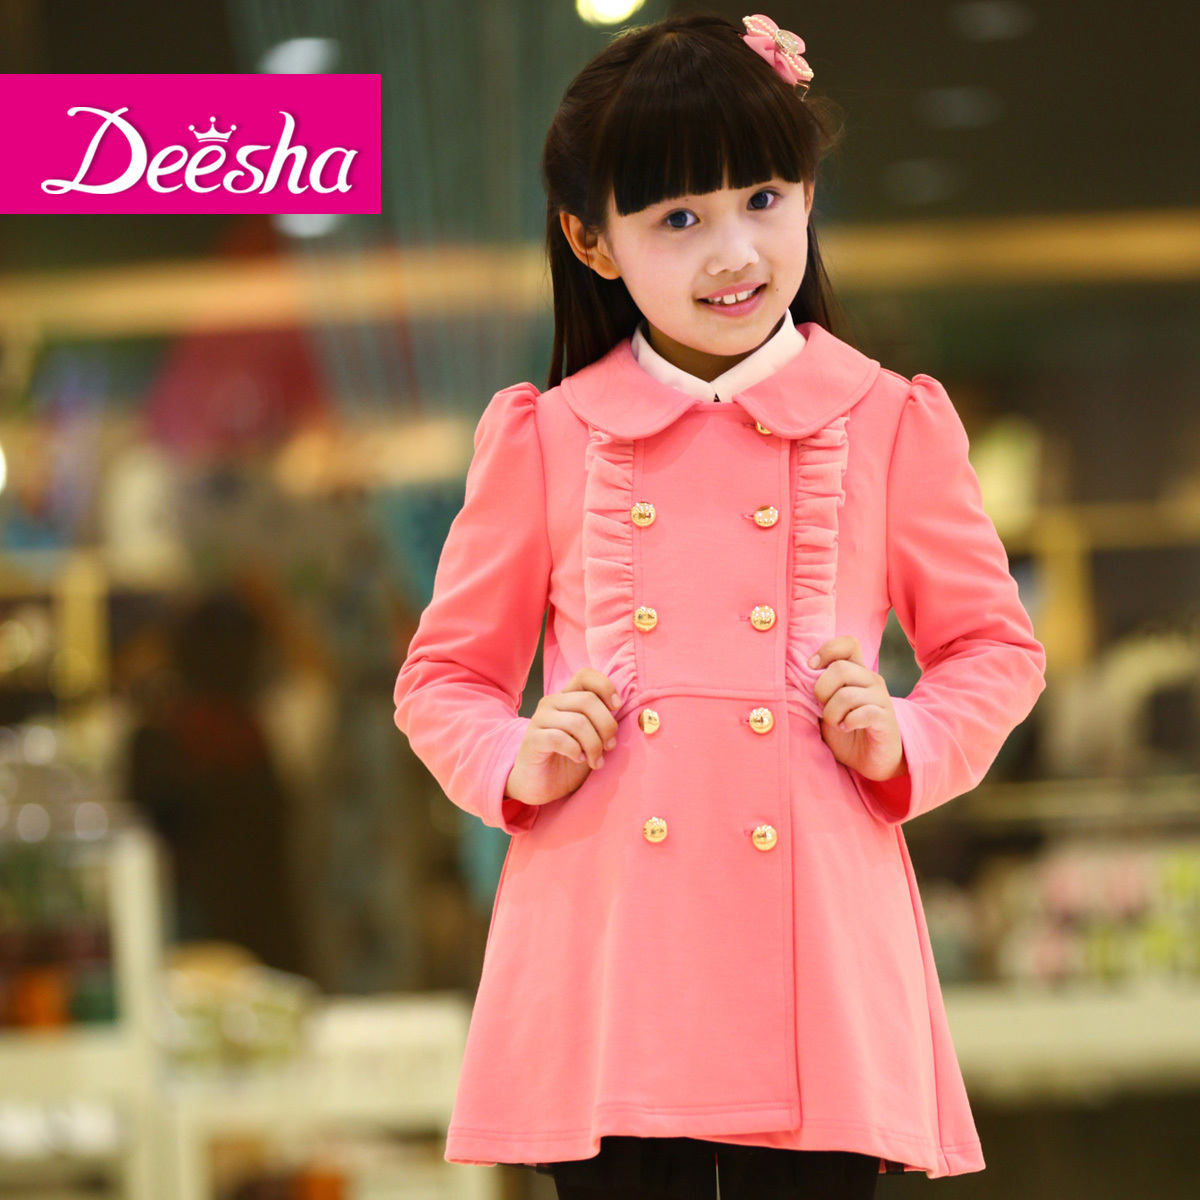 DEESHA 2012 spring and autumn female clothing princess medium-long trench outerwear 1217004